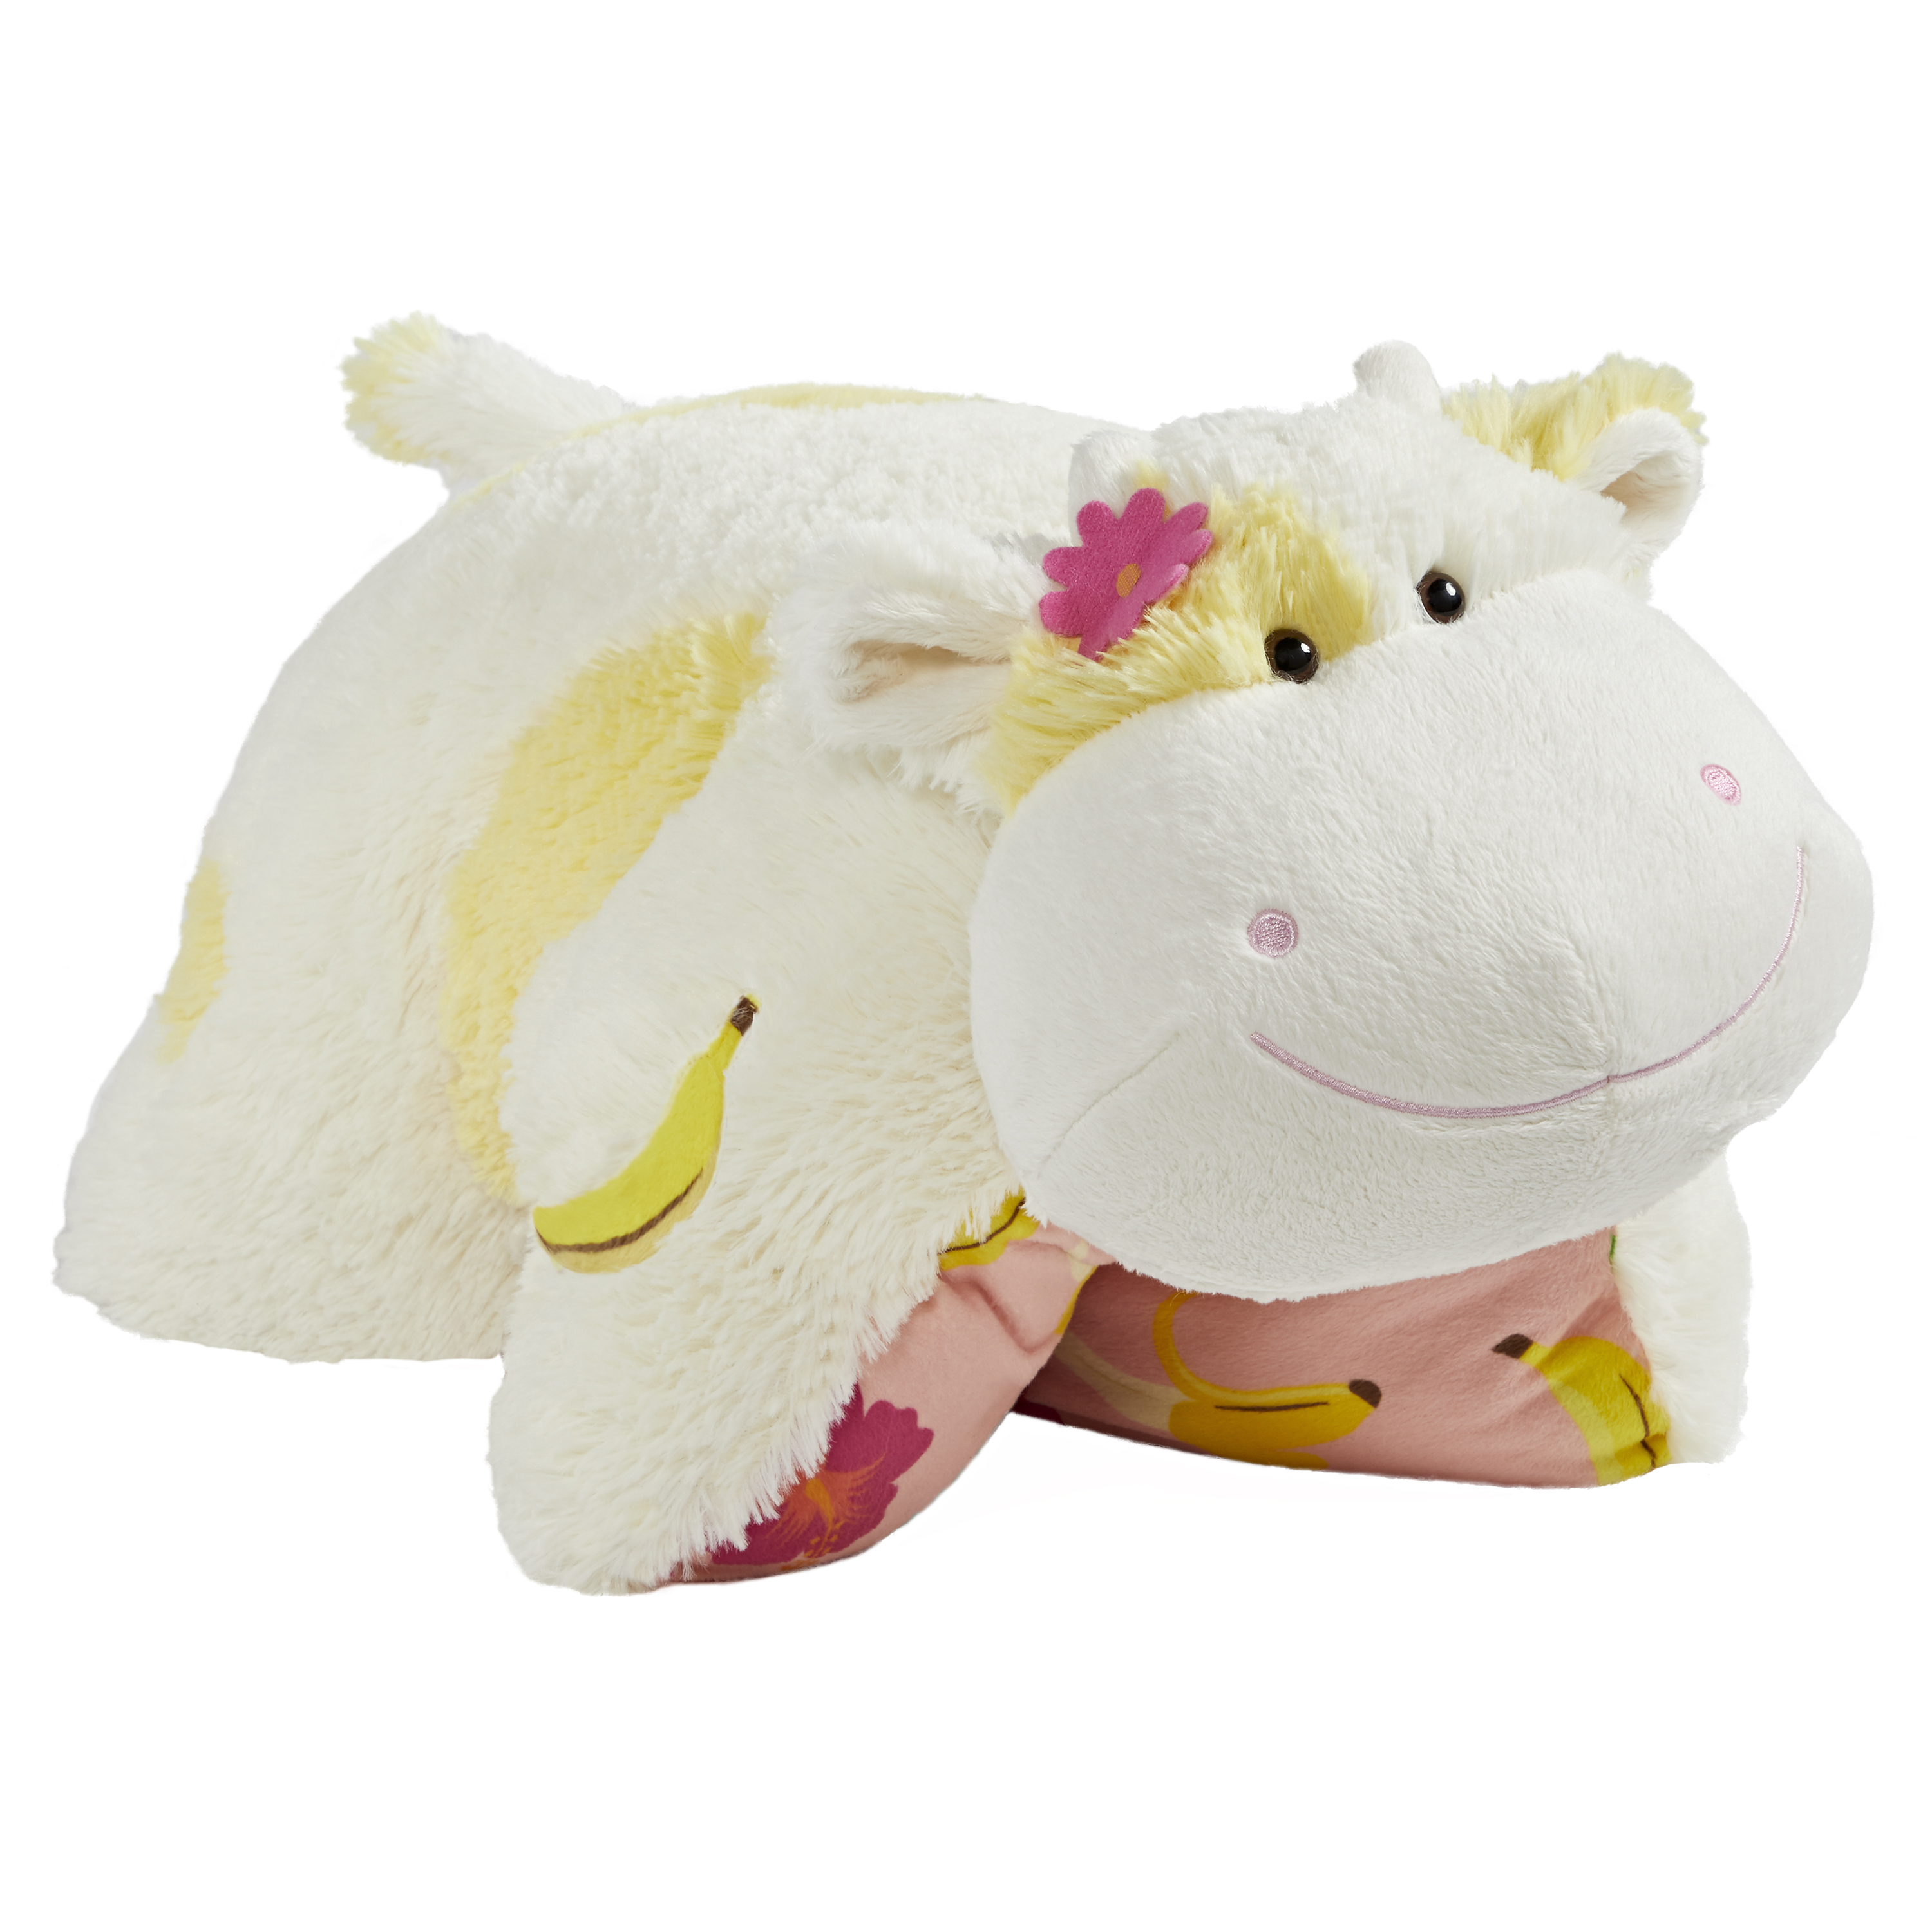 Pillow-soft, squishy, plush. Whatever you call it, we think it